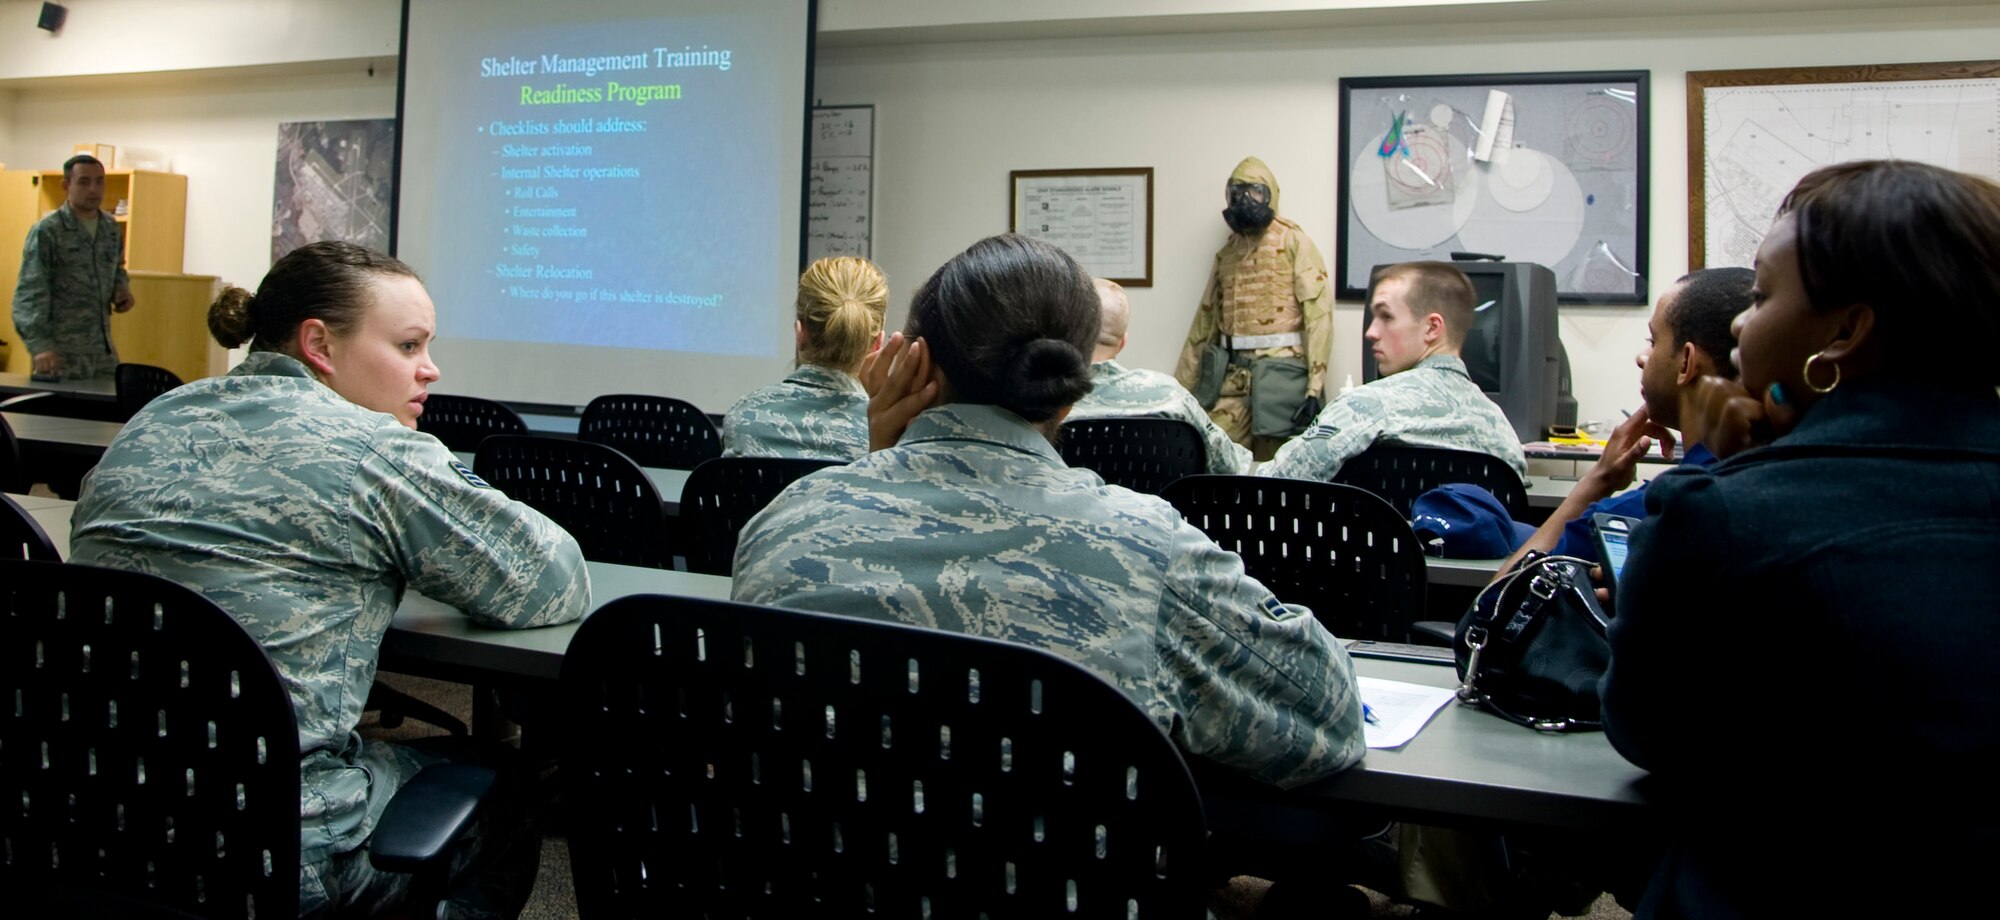 Team Dover members attend a sheltering management training session Oct. 28, 2012, at Dover Air Force Base, Del. Fitness center personnel who will be working at the shelter were taught what to expect during Hurricane Sandy. (U.S. Air Force photo by A1C Kathryn Stilwell)